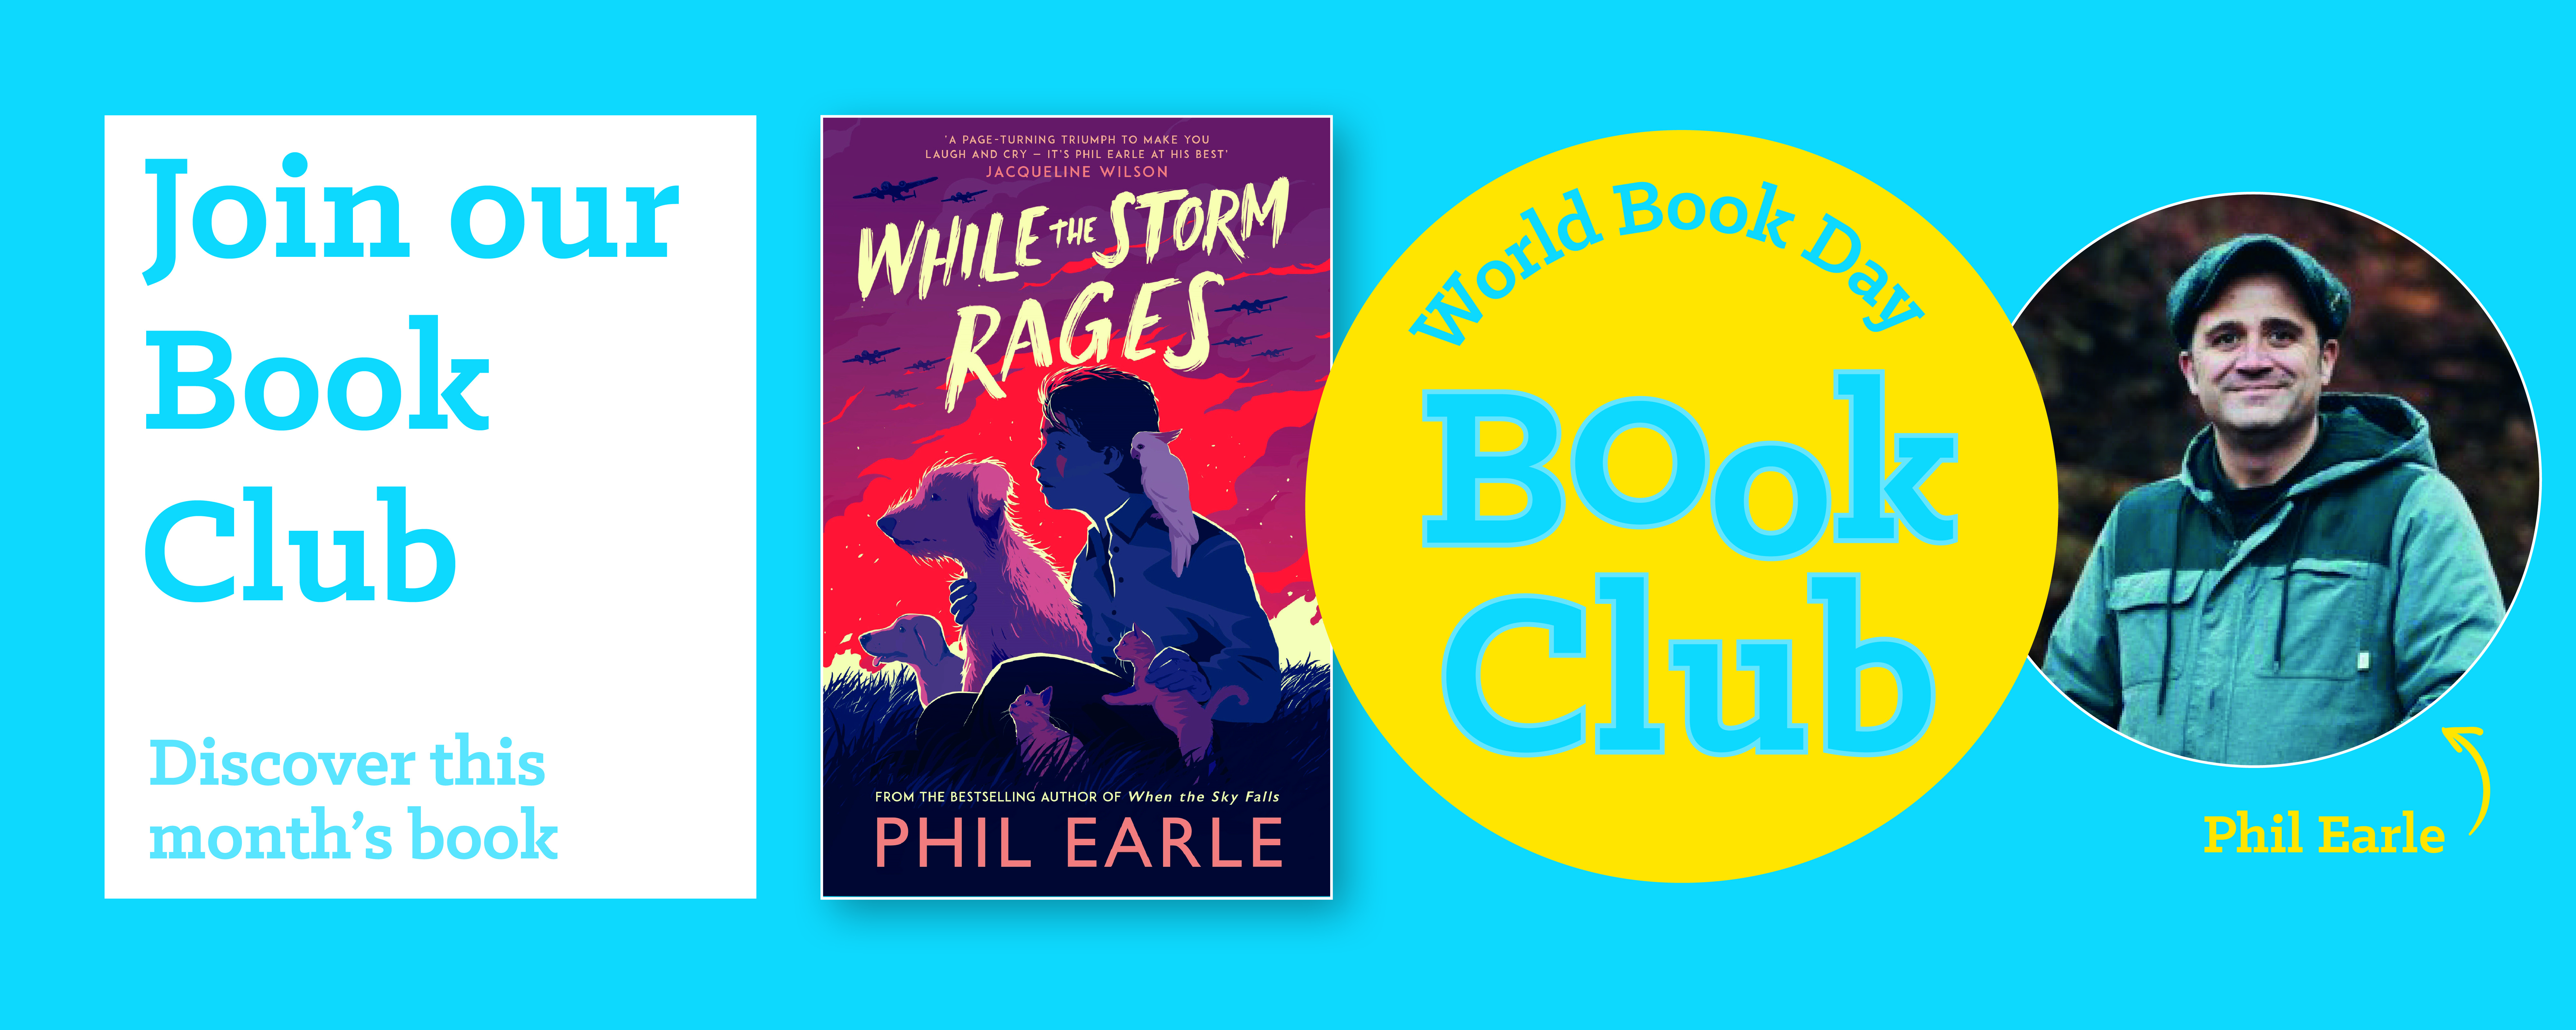 Book Club: While the Storm Rages